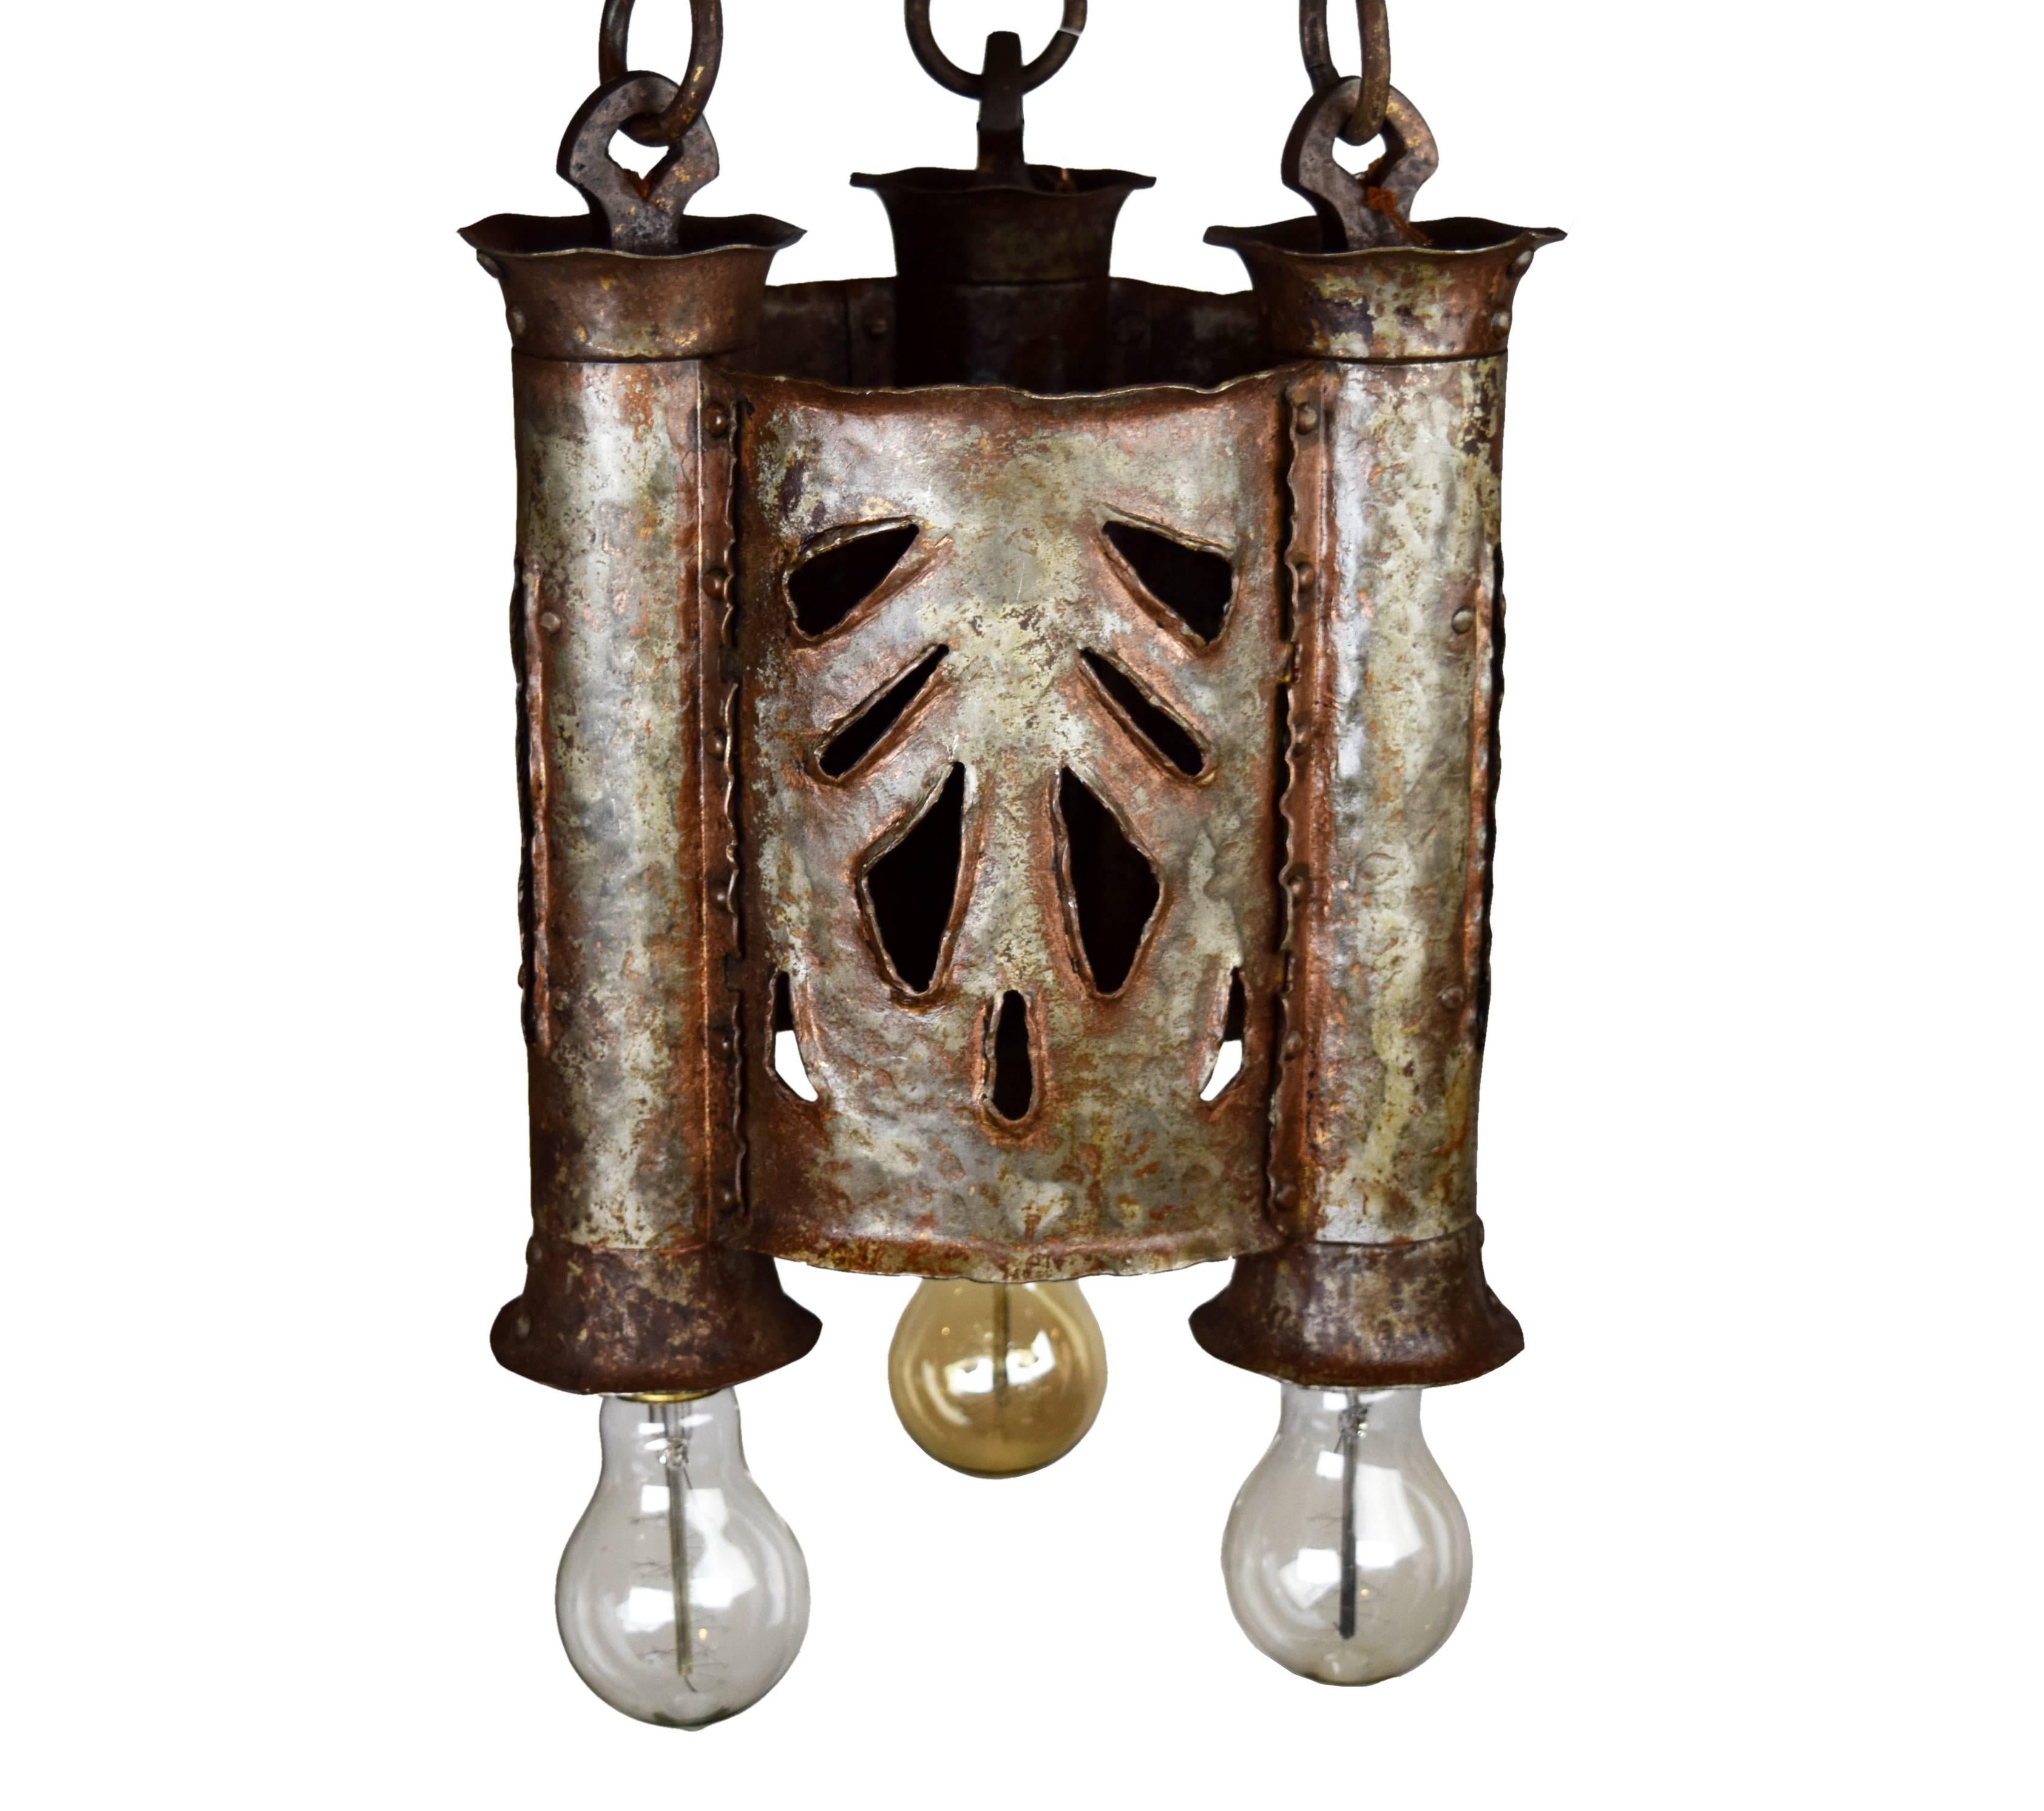 Gothic Revival Gothic Iron Three-Light Pendant with Hammered Finish For Sale